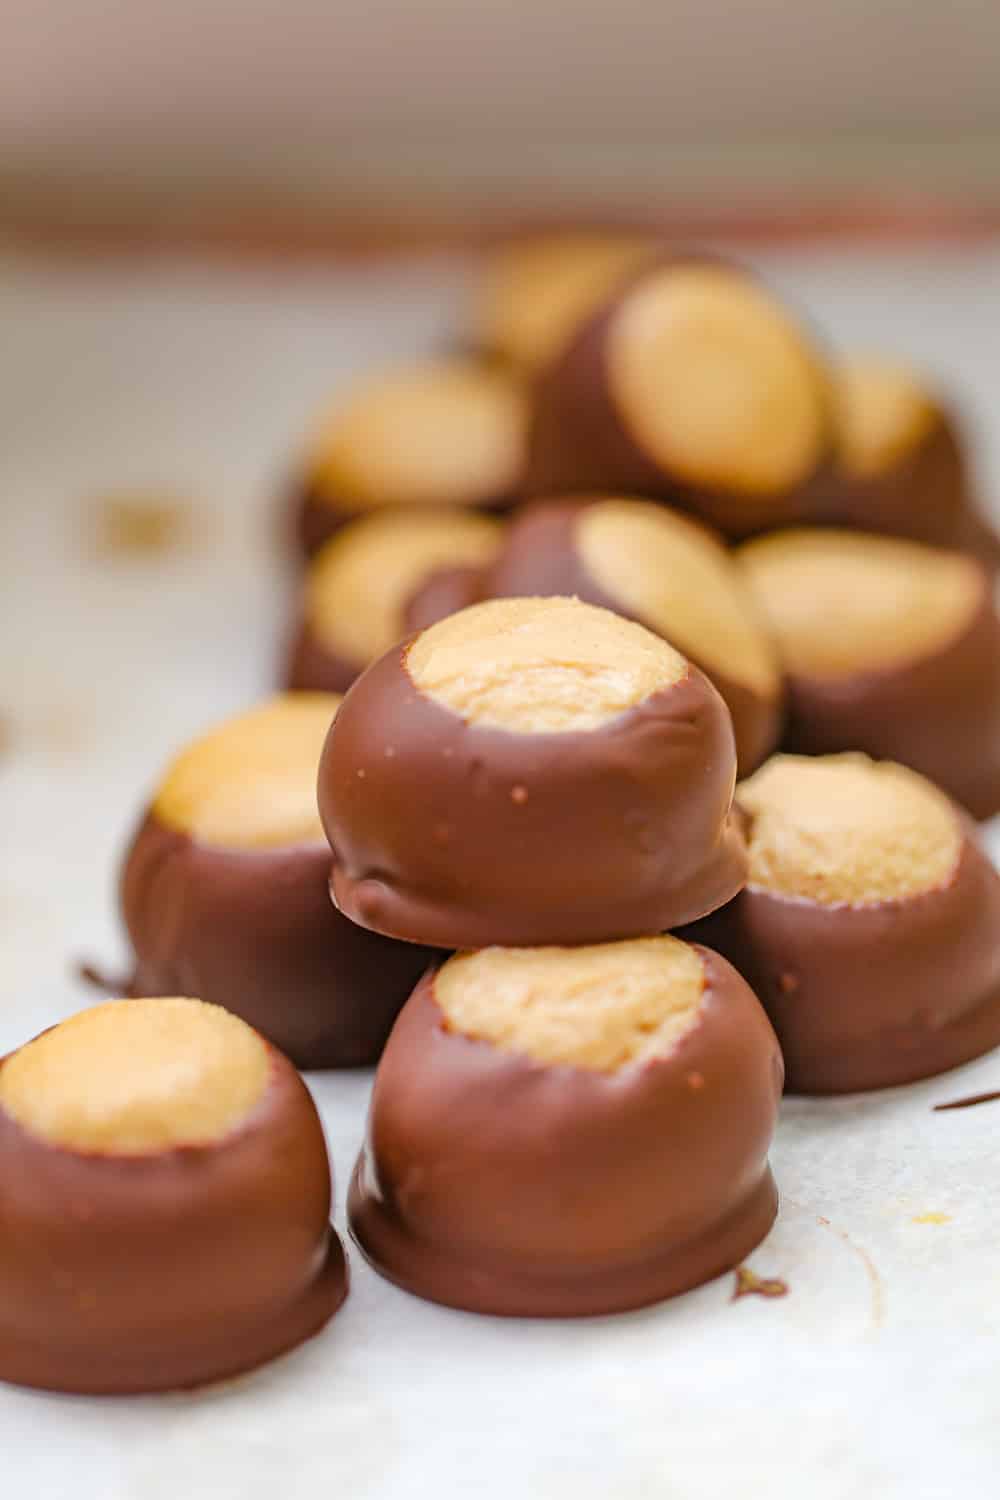 How to Make Buckeyes Candies